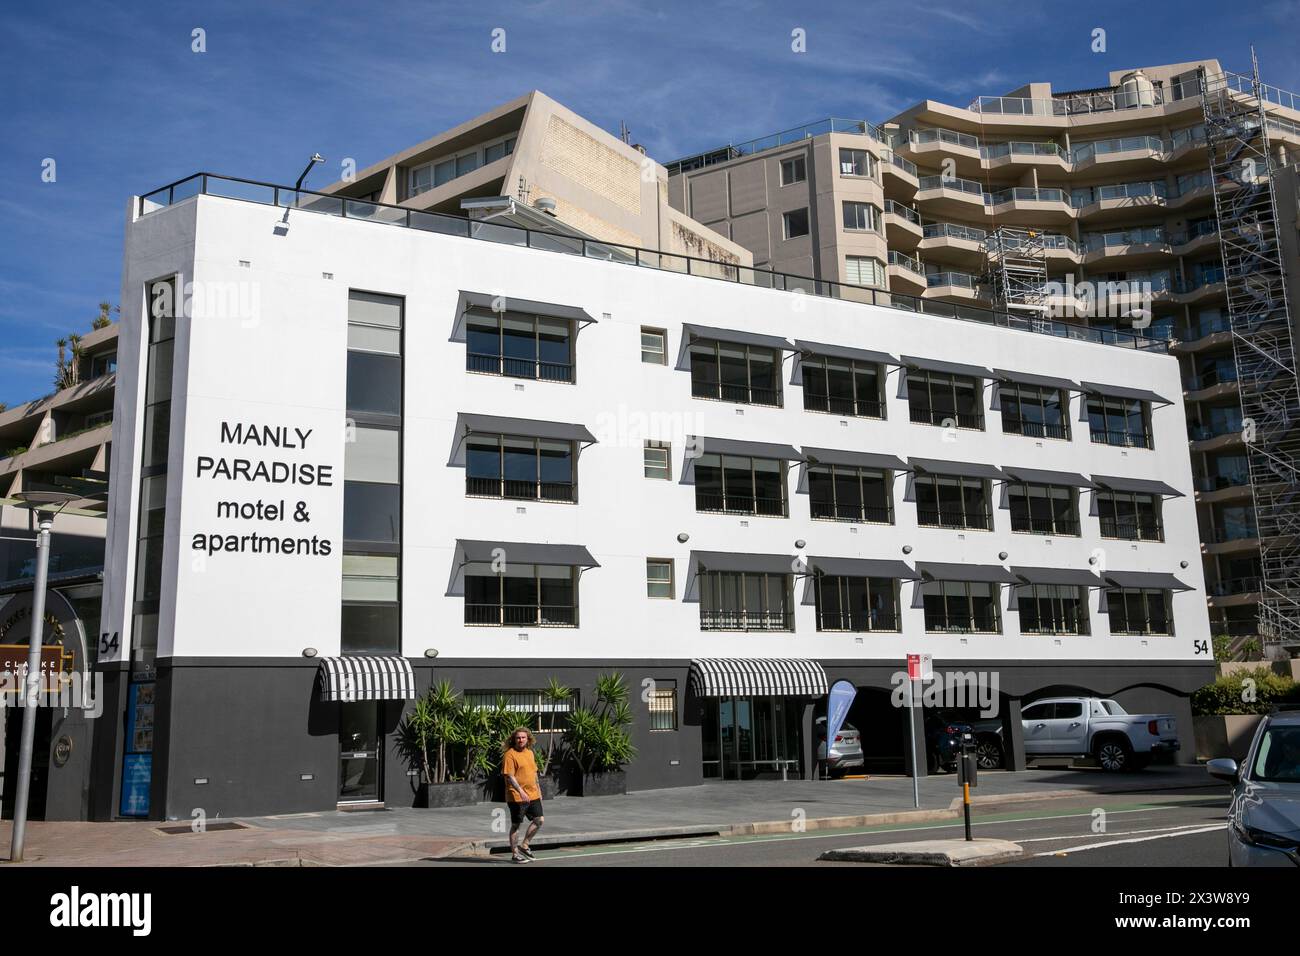 Manly Paradise apartment and motel building in the Sydney seaside suburb of Manly Beach,Sydney,NSW,Australia Stock Photo